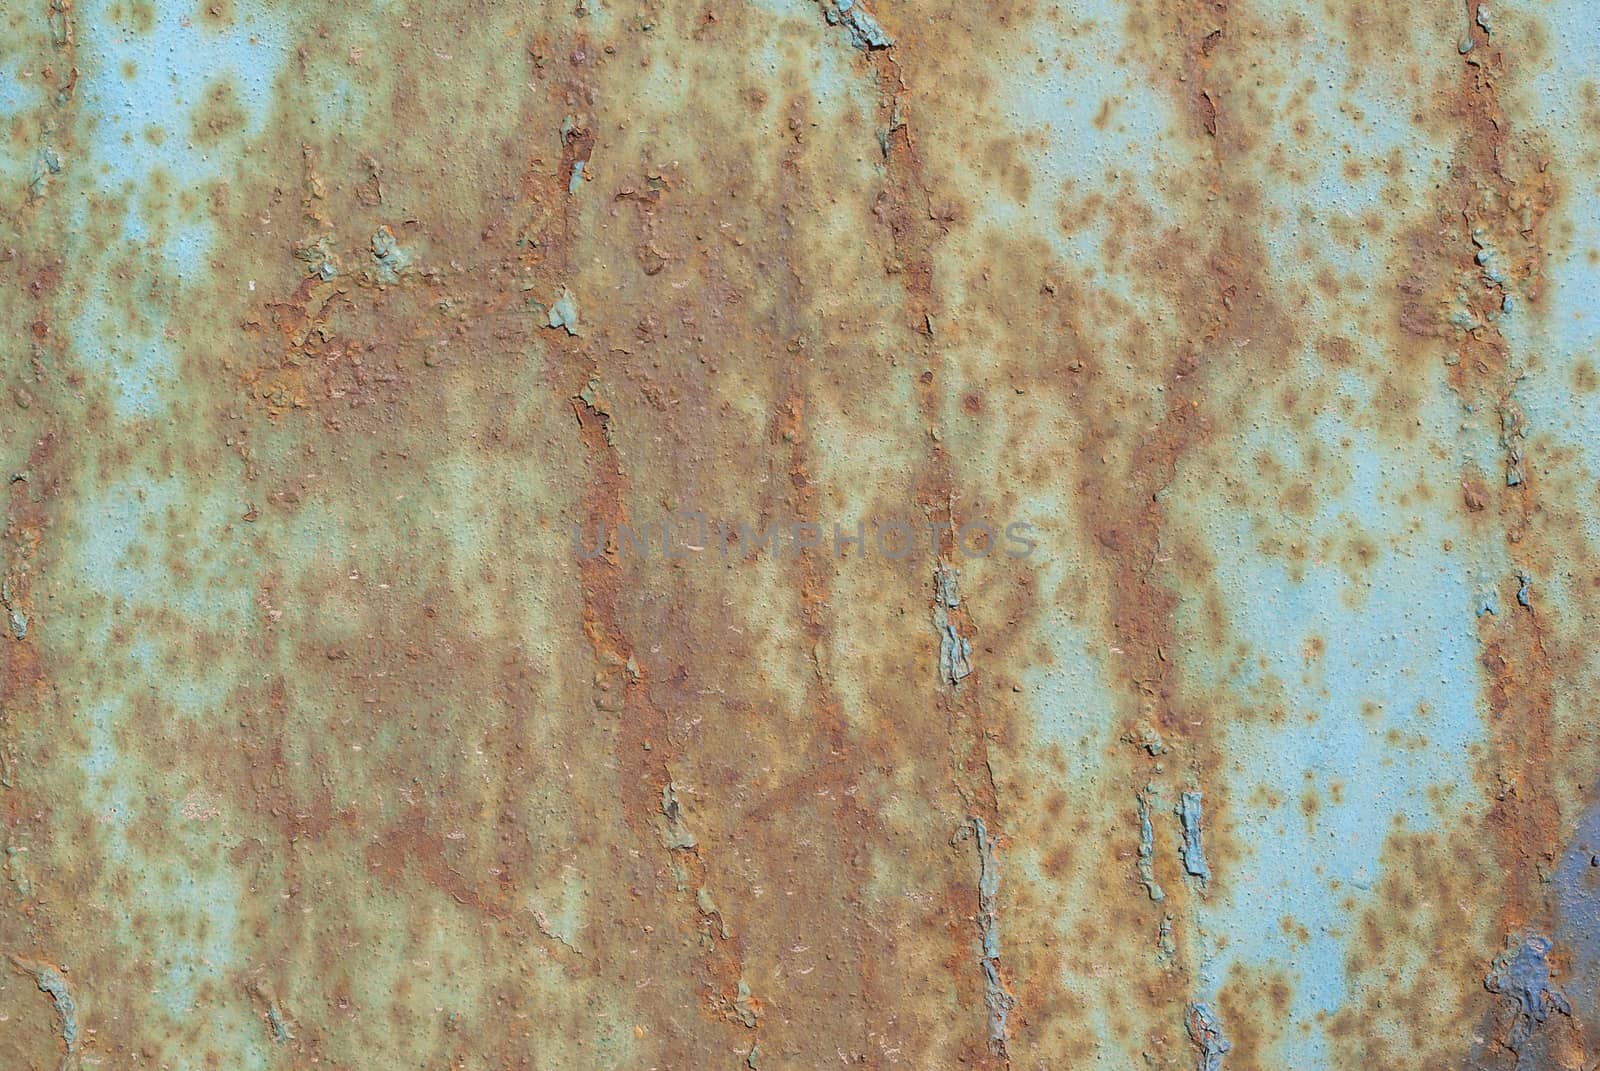 surface of rusty iron with remnants of old paint, grunge metal surface, texture background by uvisni